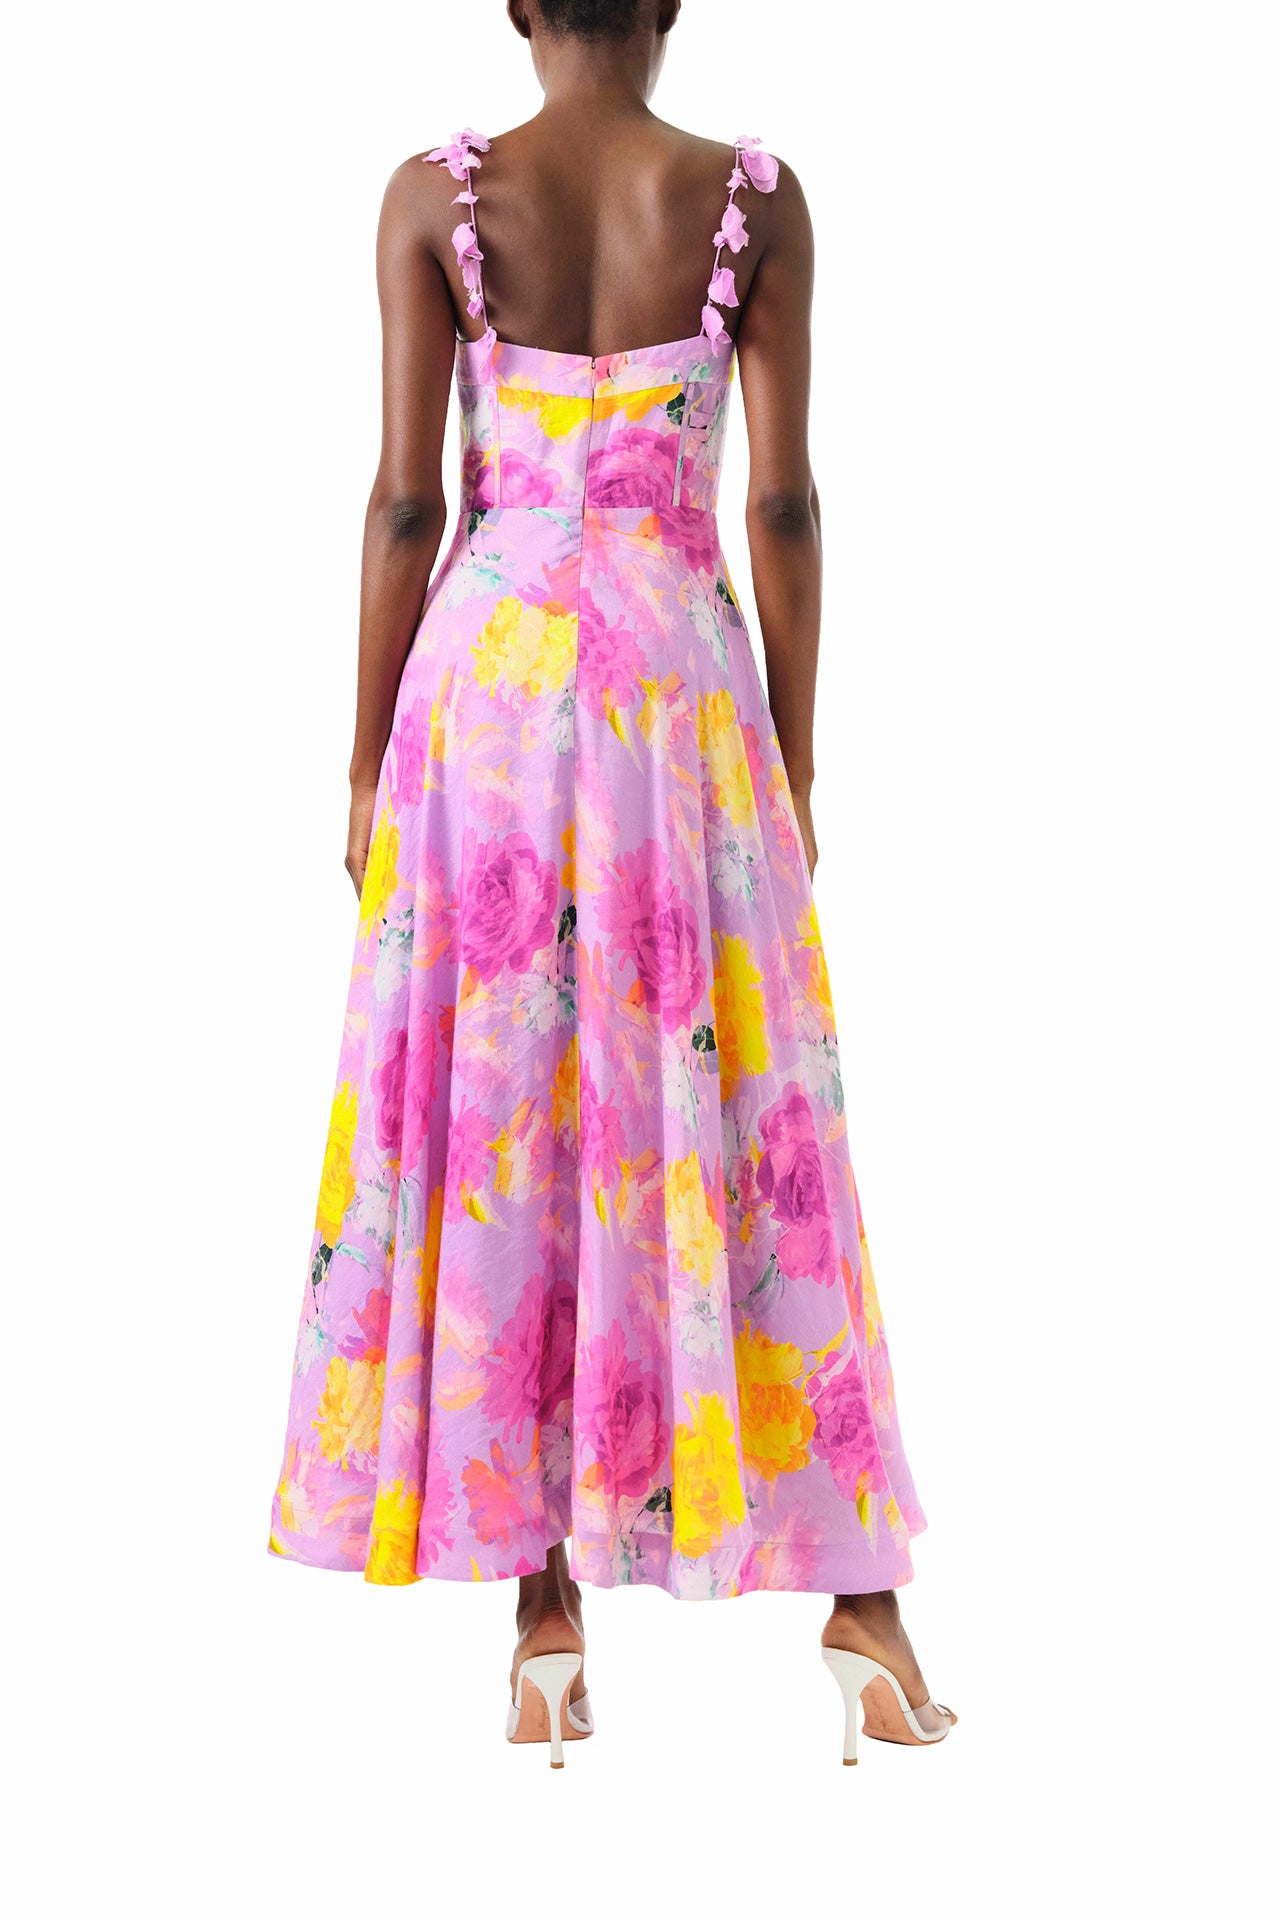 ML Monique Lhuillier 2024 Sleeveless midi dress with floral appliqued spaghetti straps and corset bodice in pink, purple and yellow floral printed linen - back.